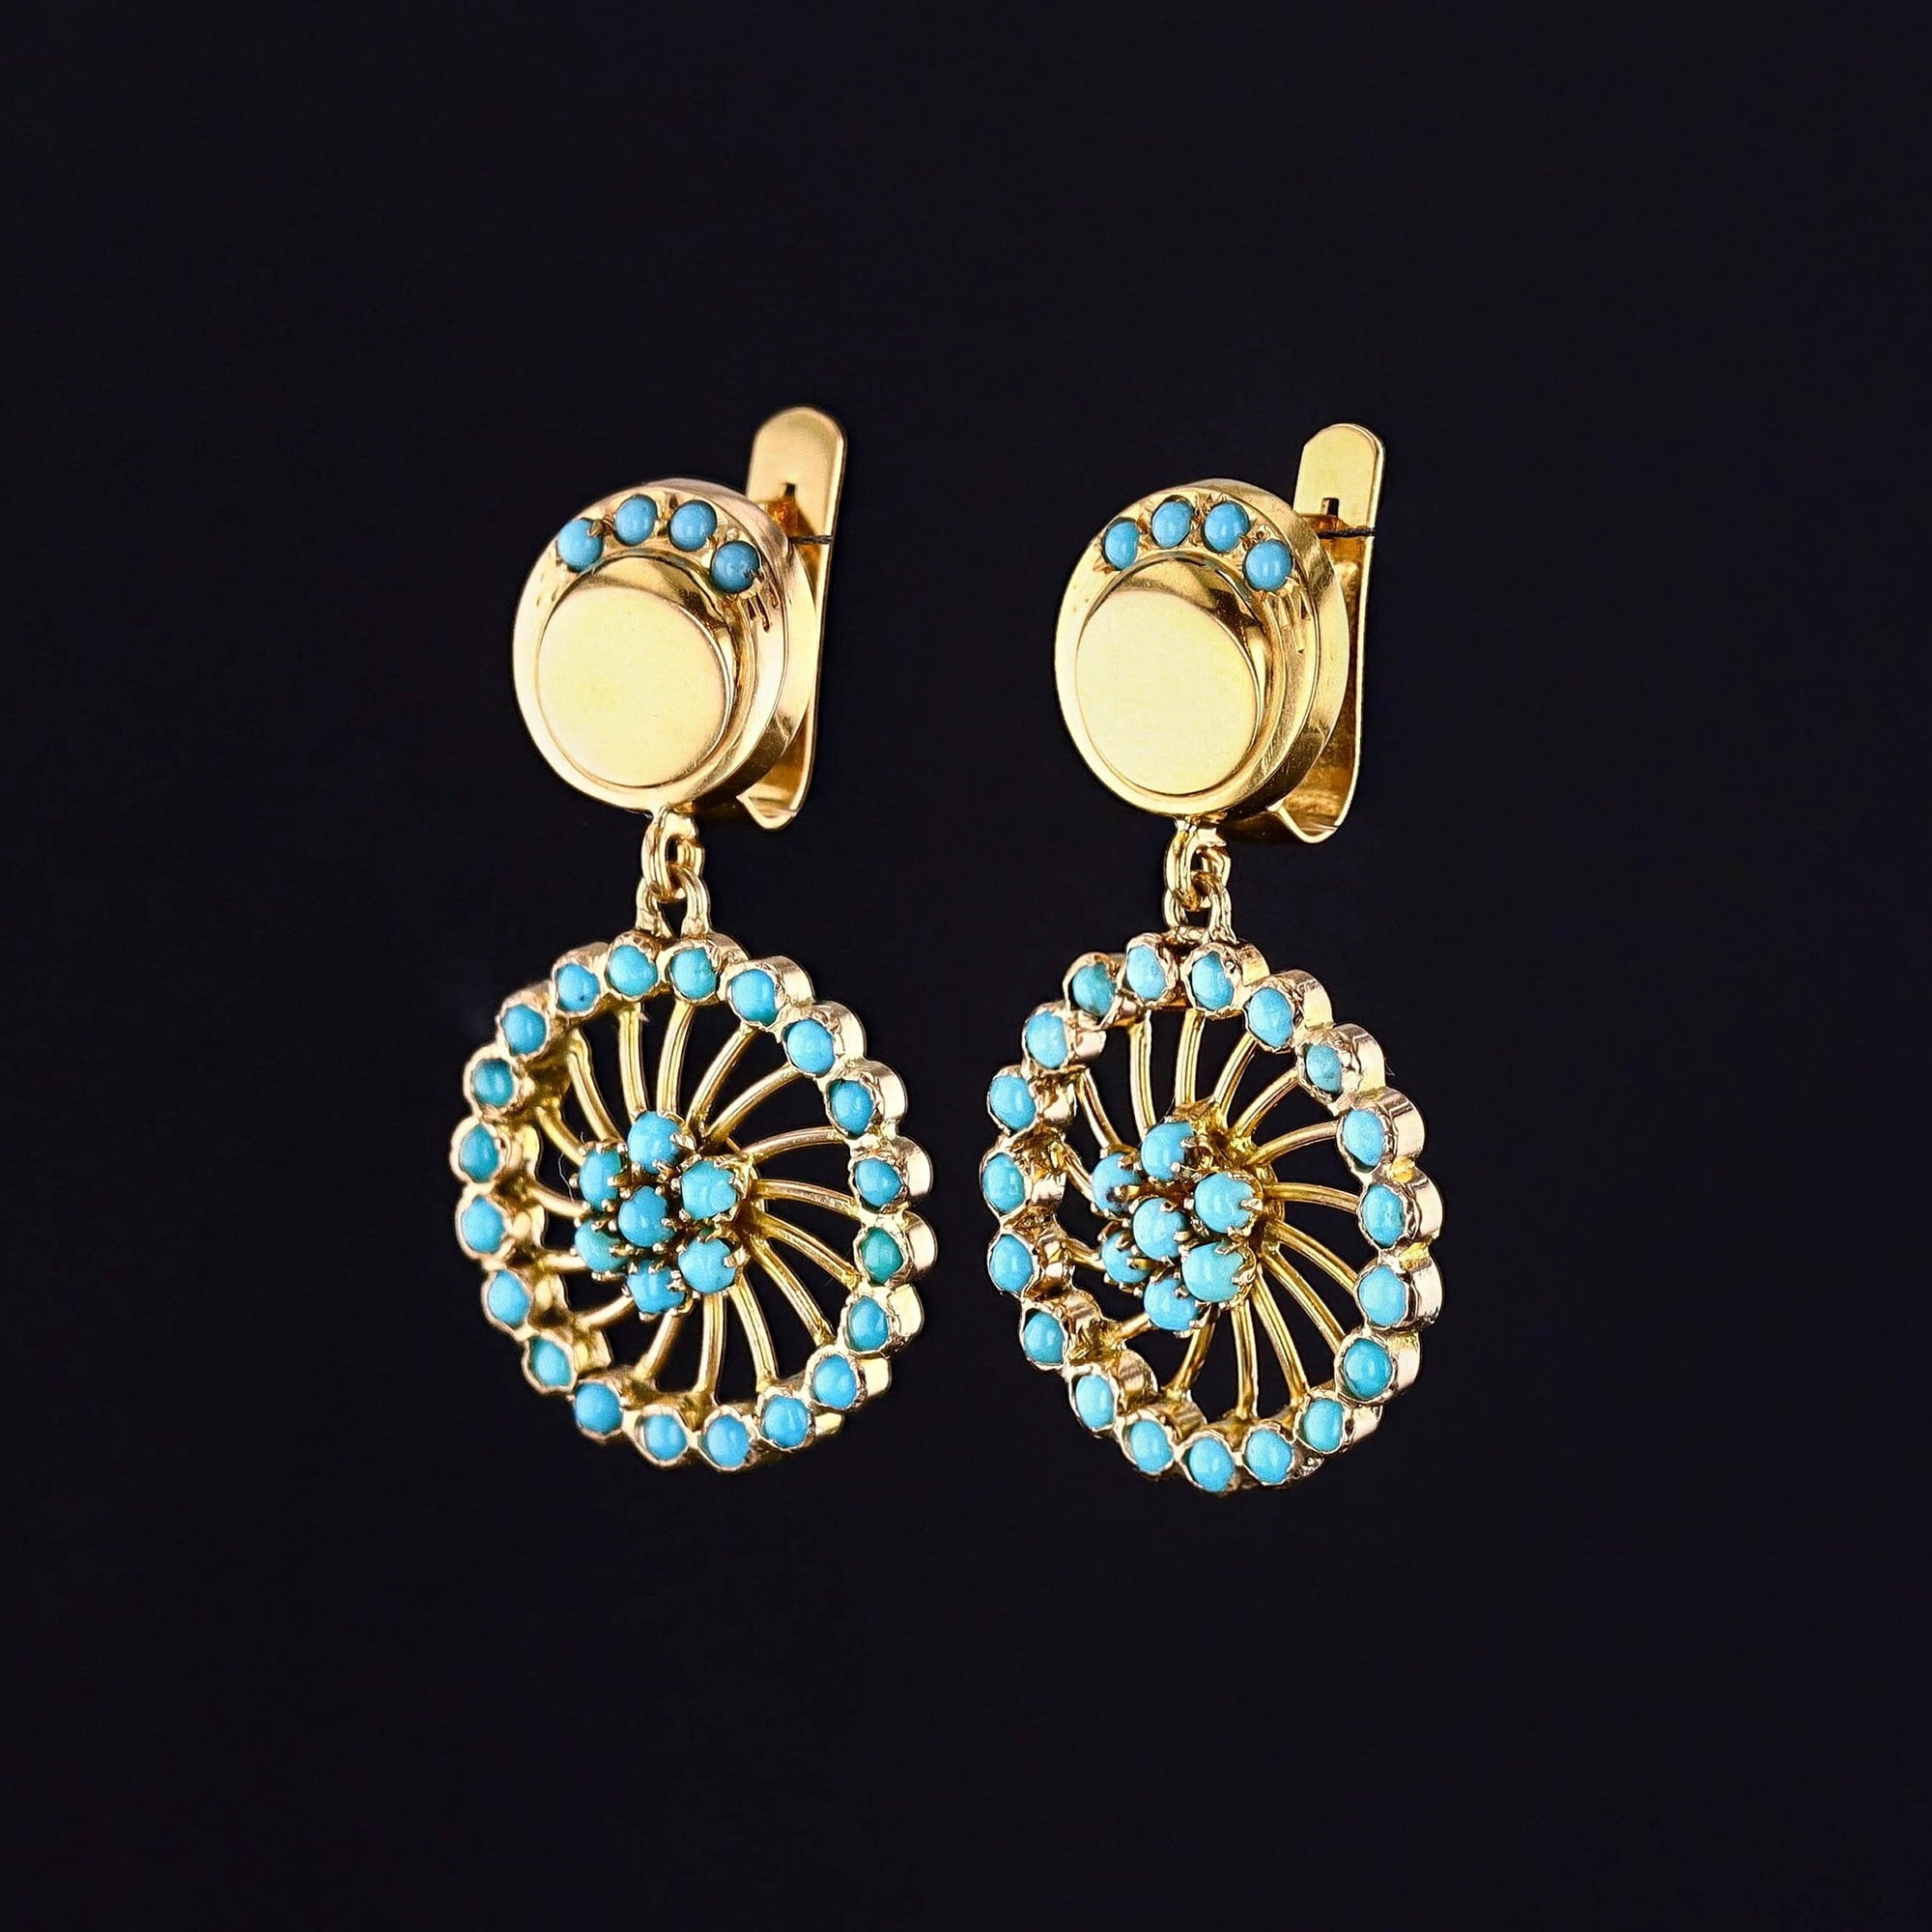 Vintage Turquoise Earrings of 19k Gold